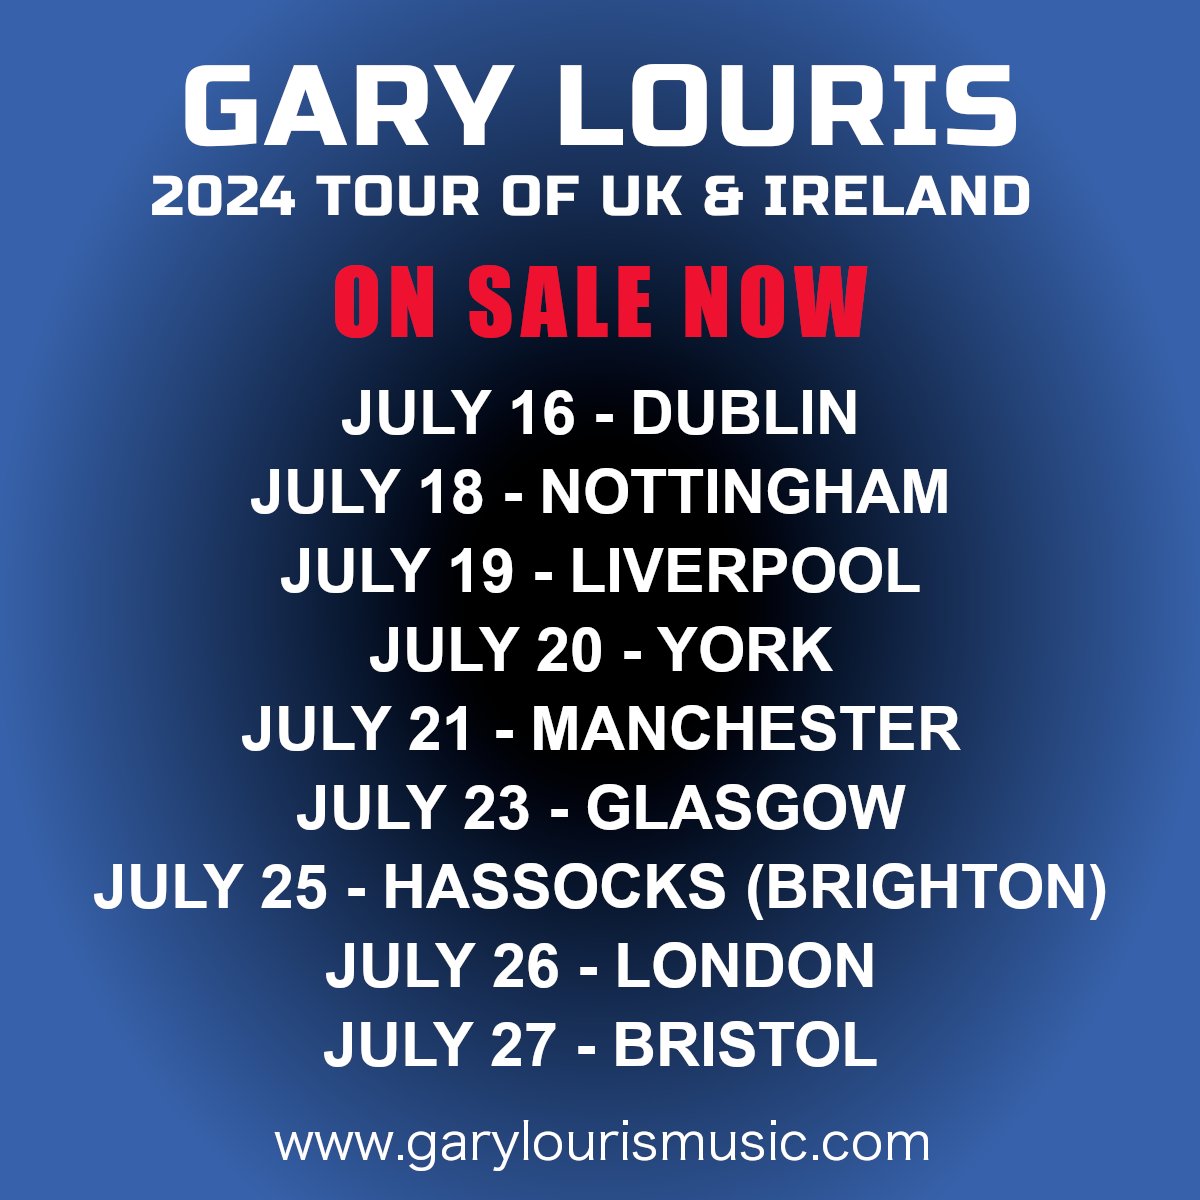 Tickets are now on sale for the Gary Louris UK / Ireland solo tour in July. Tour schedule with ticket links: bit.ly/GLshows